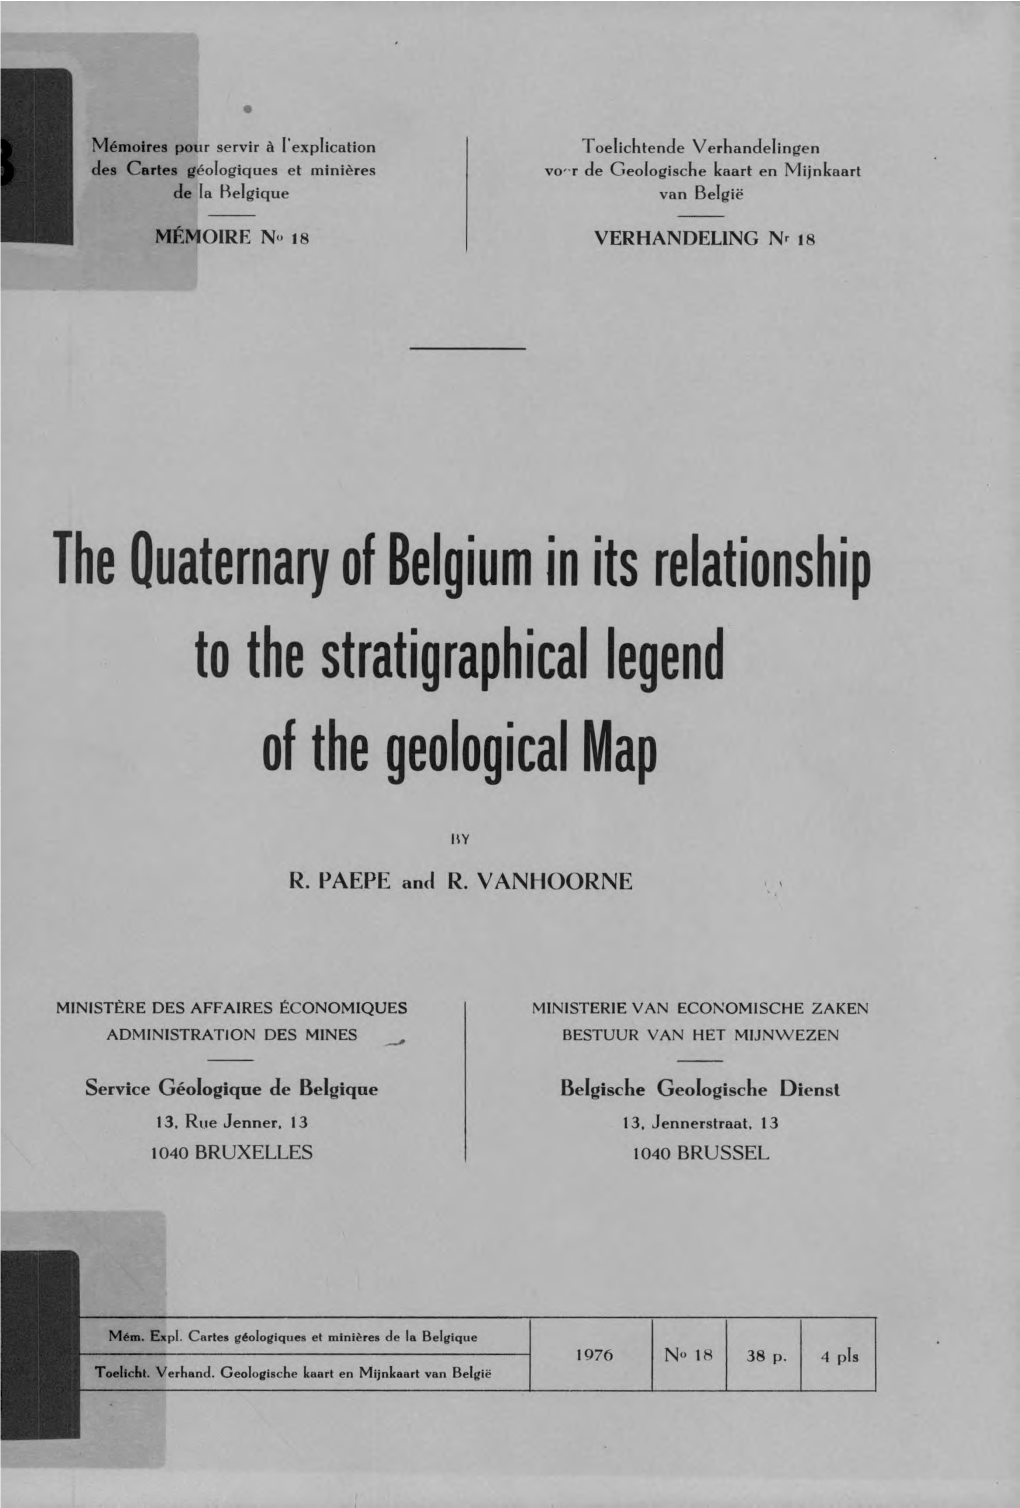 The Quaternary of Belgium in Its Relationship to the Stratigraphical Legend of the Geological Map